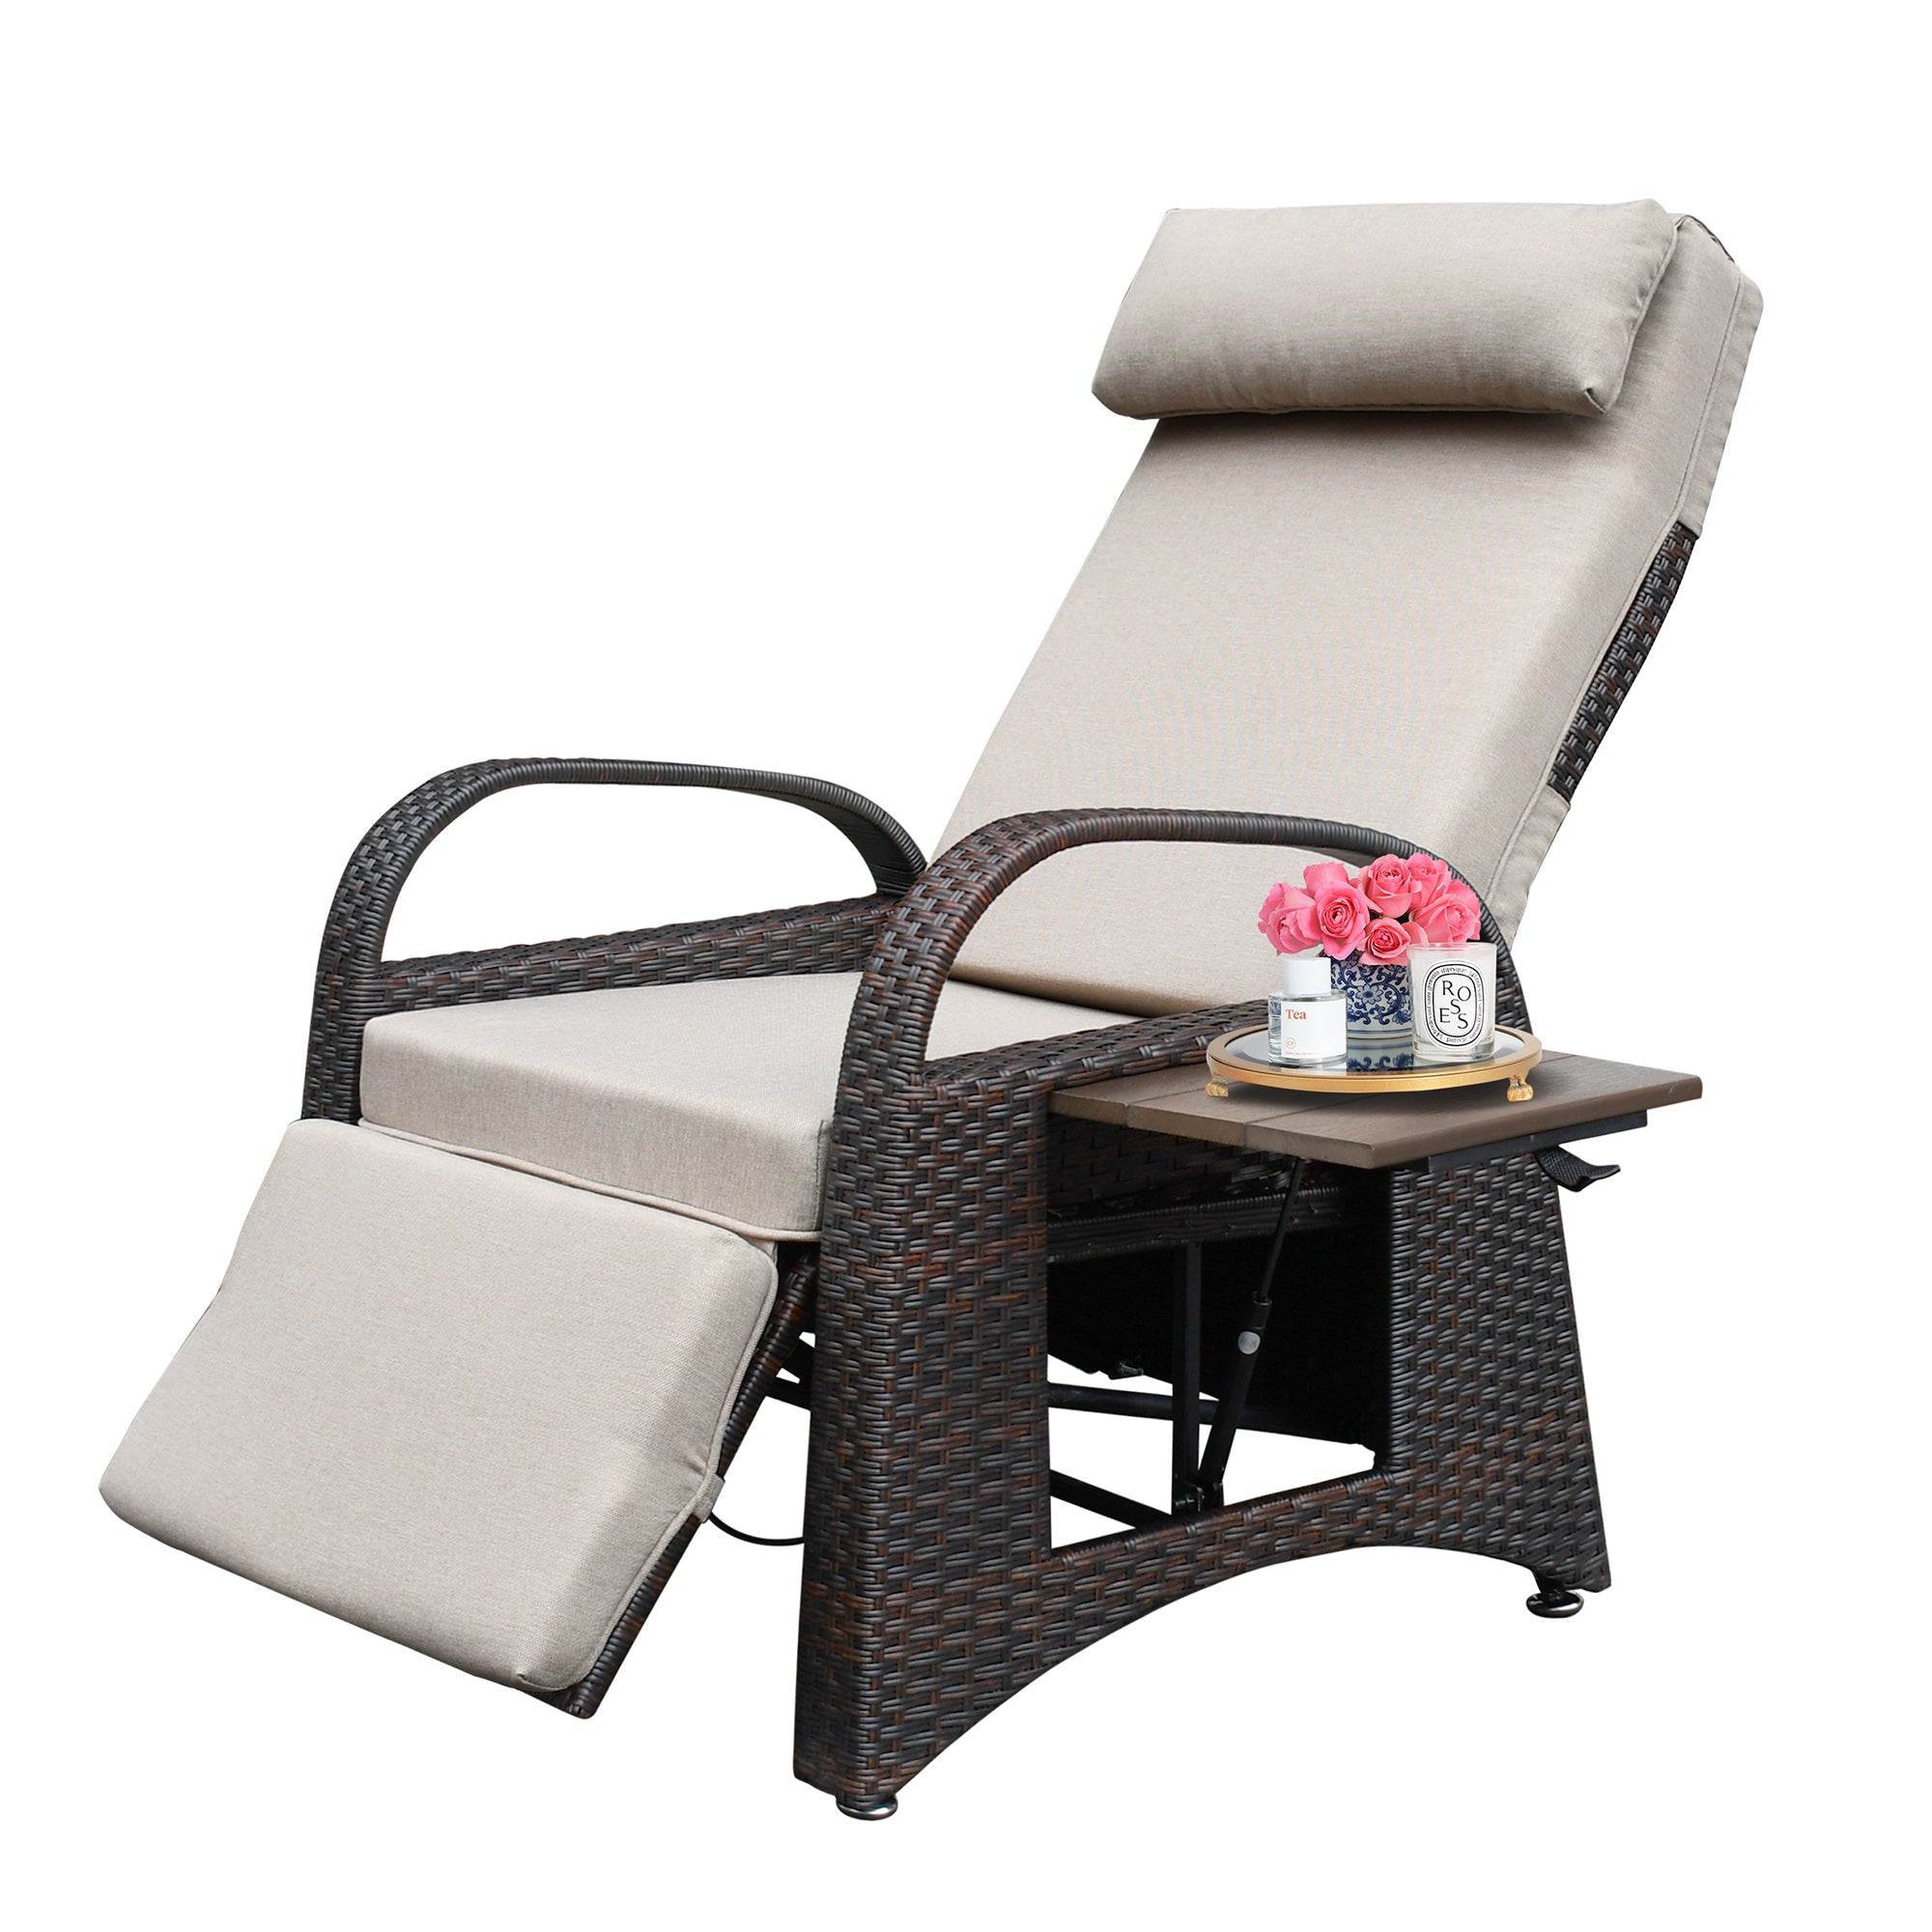 [KGORGE Plus] Outdoor Patio PE Wicker Adjustable Reclining Lounge Chair and Removable Soft Cushion with Modern Armchair and Ergonomic for Home, Sunbathing